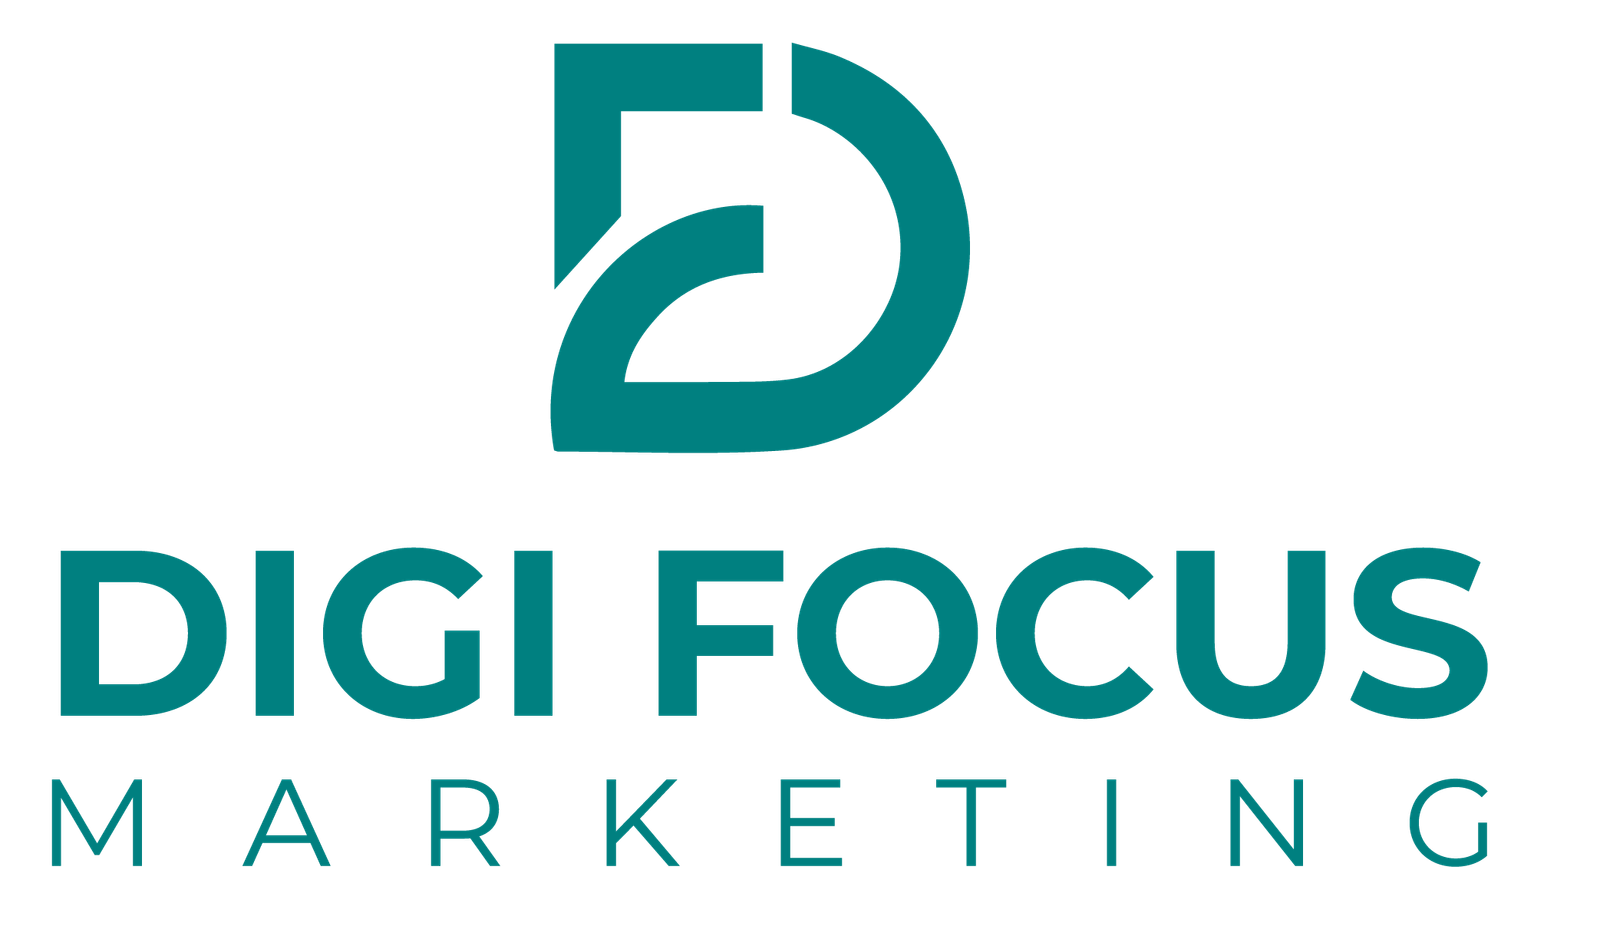 Digi Focus Marketing Agency is a results-oriented digital marketing firm, dedicated to fueling business success online.